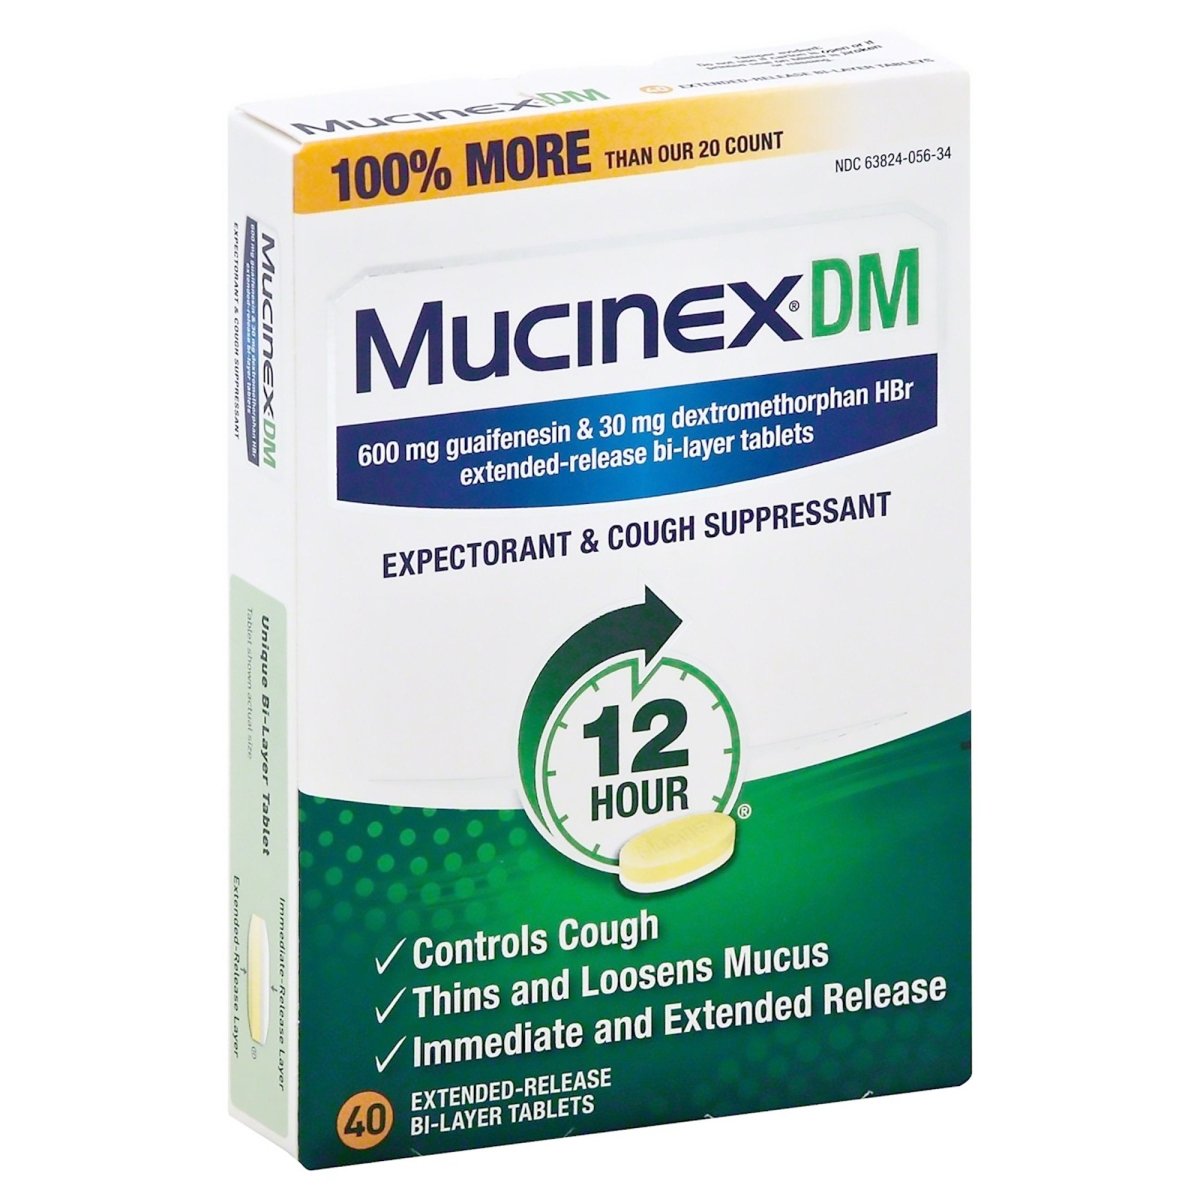 Mucinex Dm Cold And Cough Relief - 709119_CT - 2